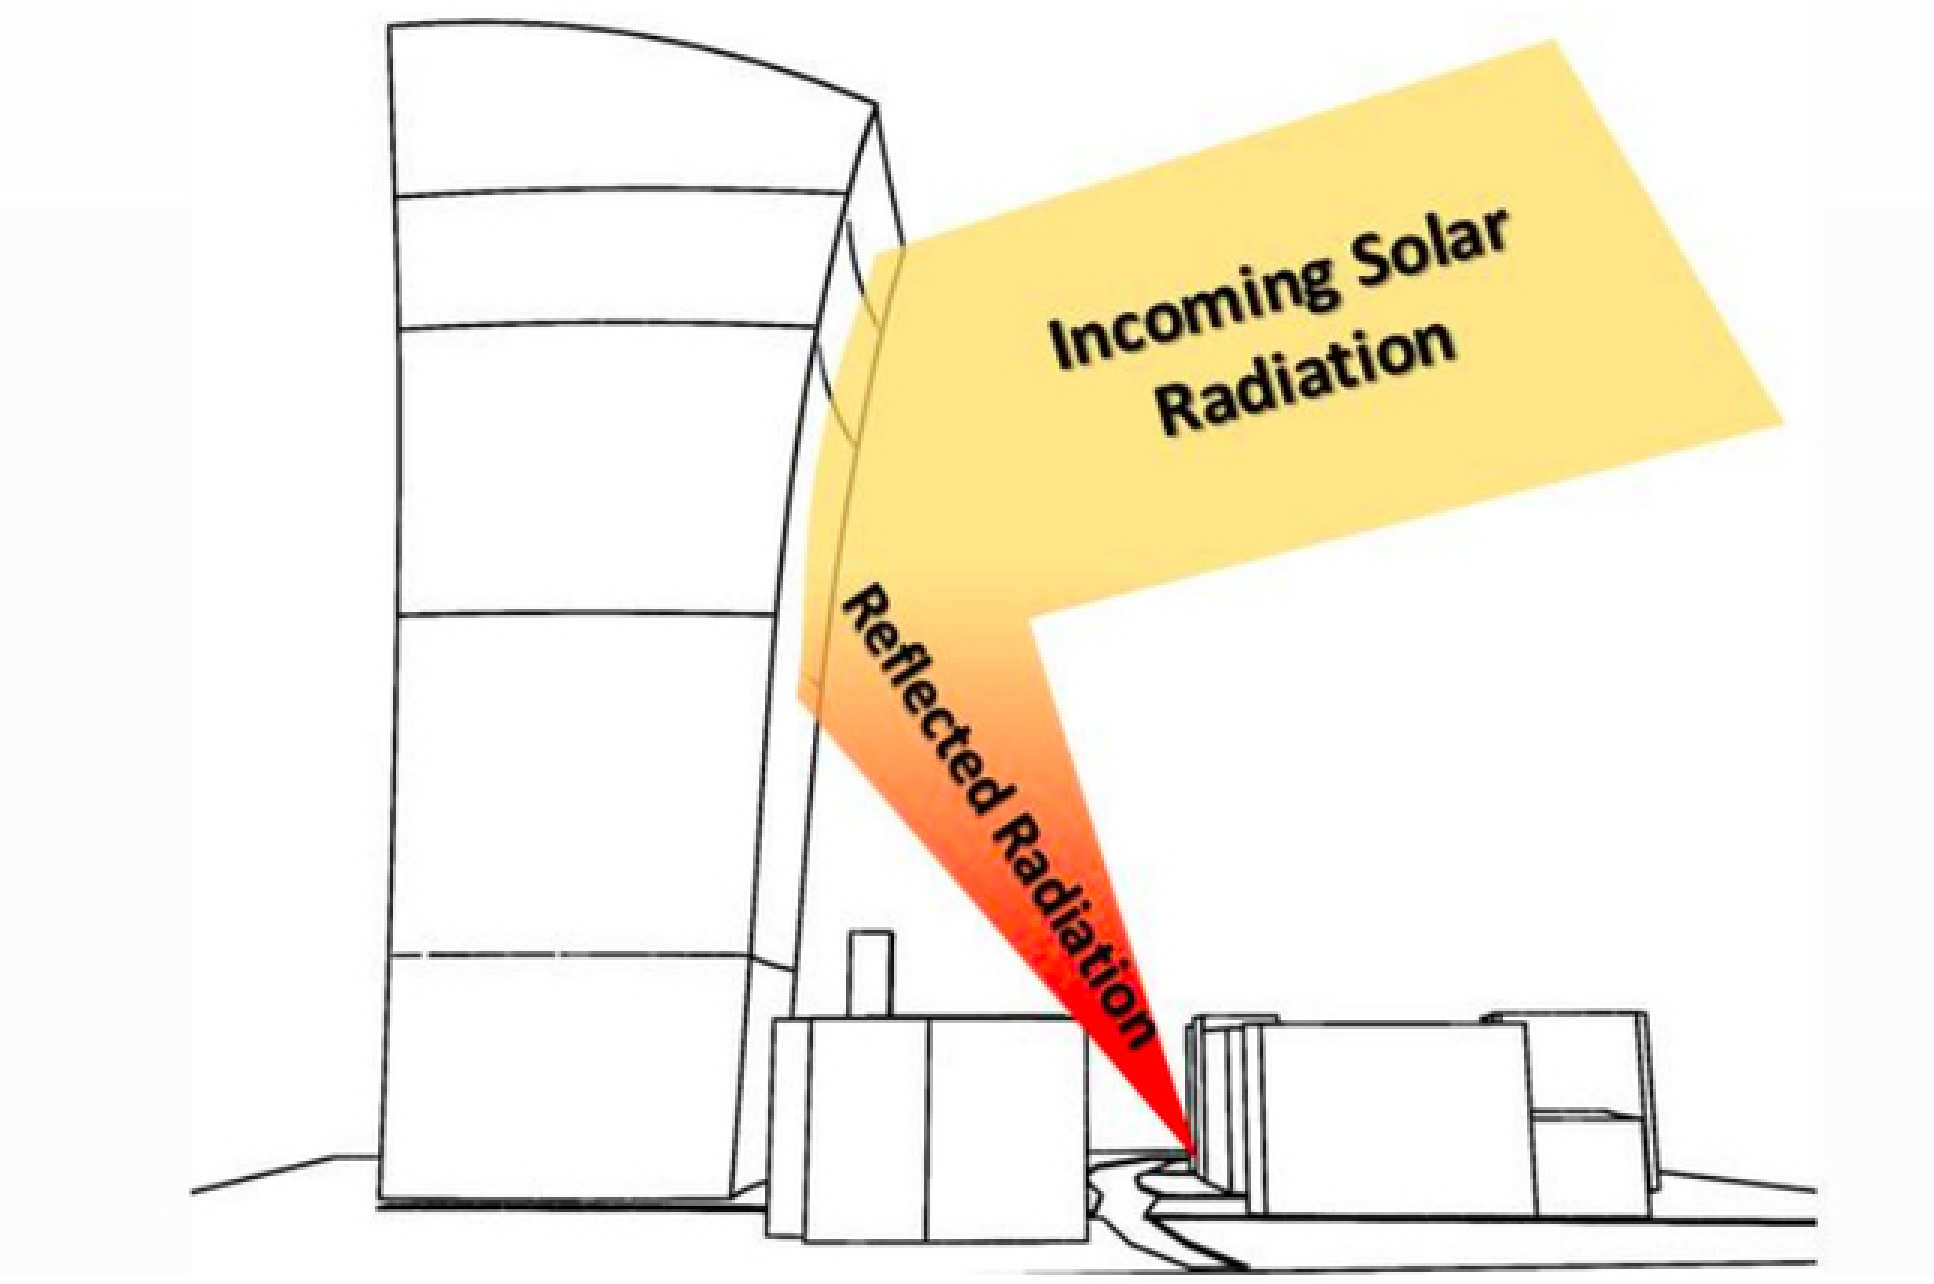 Diagram of sunshine reflecting off the concave surface of the building